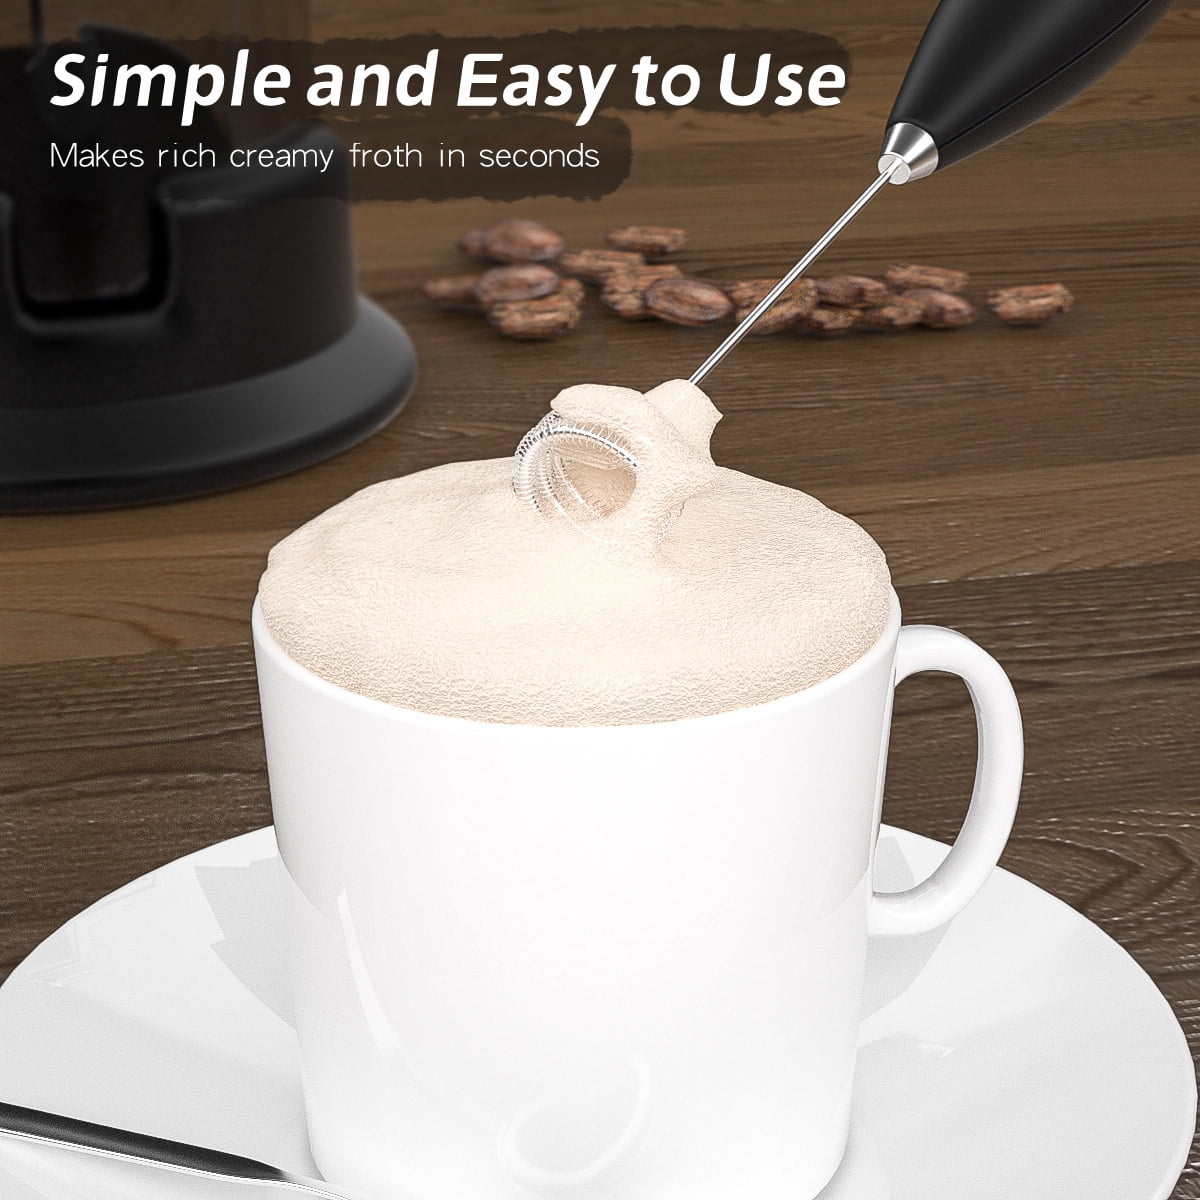 Coffee Beater,2 in 1 Electric Coffee mixer and eggbeater, handheld  rechargeable coffee beater, powerful milk frother, Portable coffee mixer,  eggbeater hand mixer, electric blender with two detachable whisks by EC mart